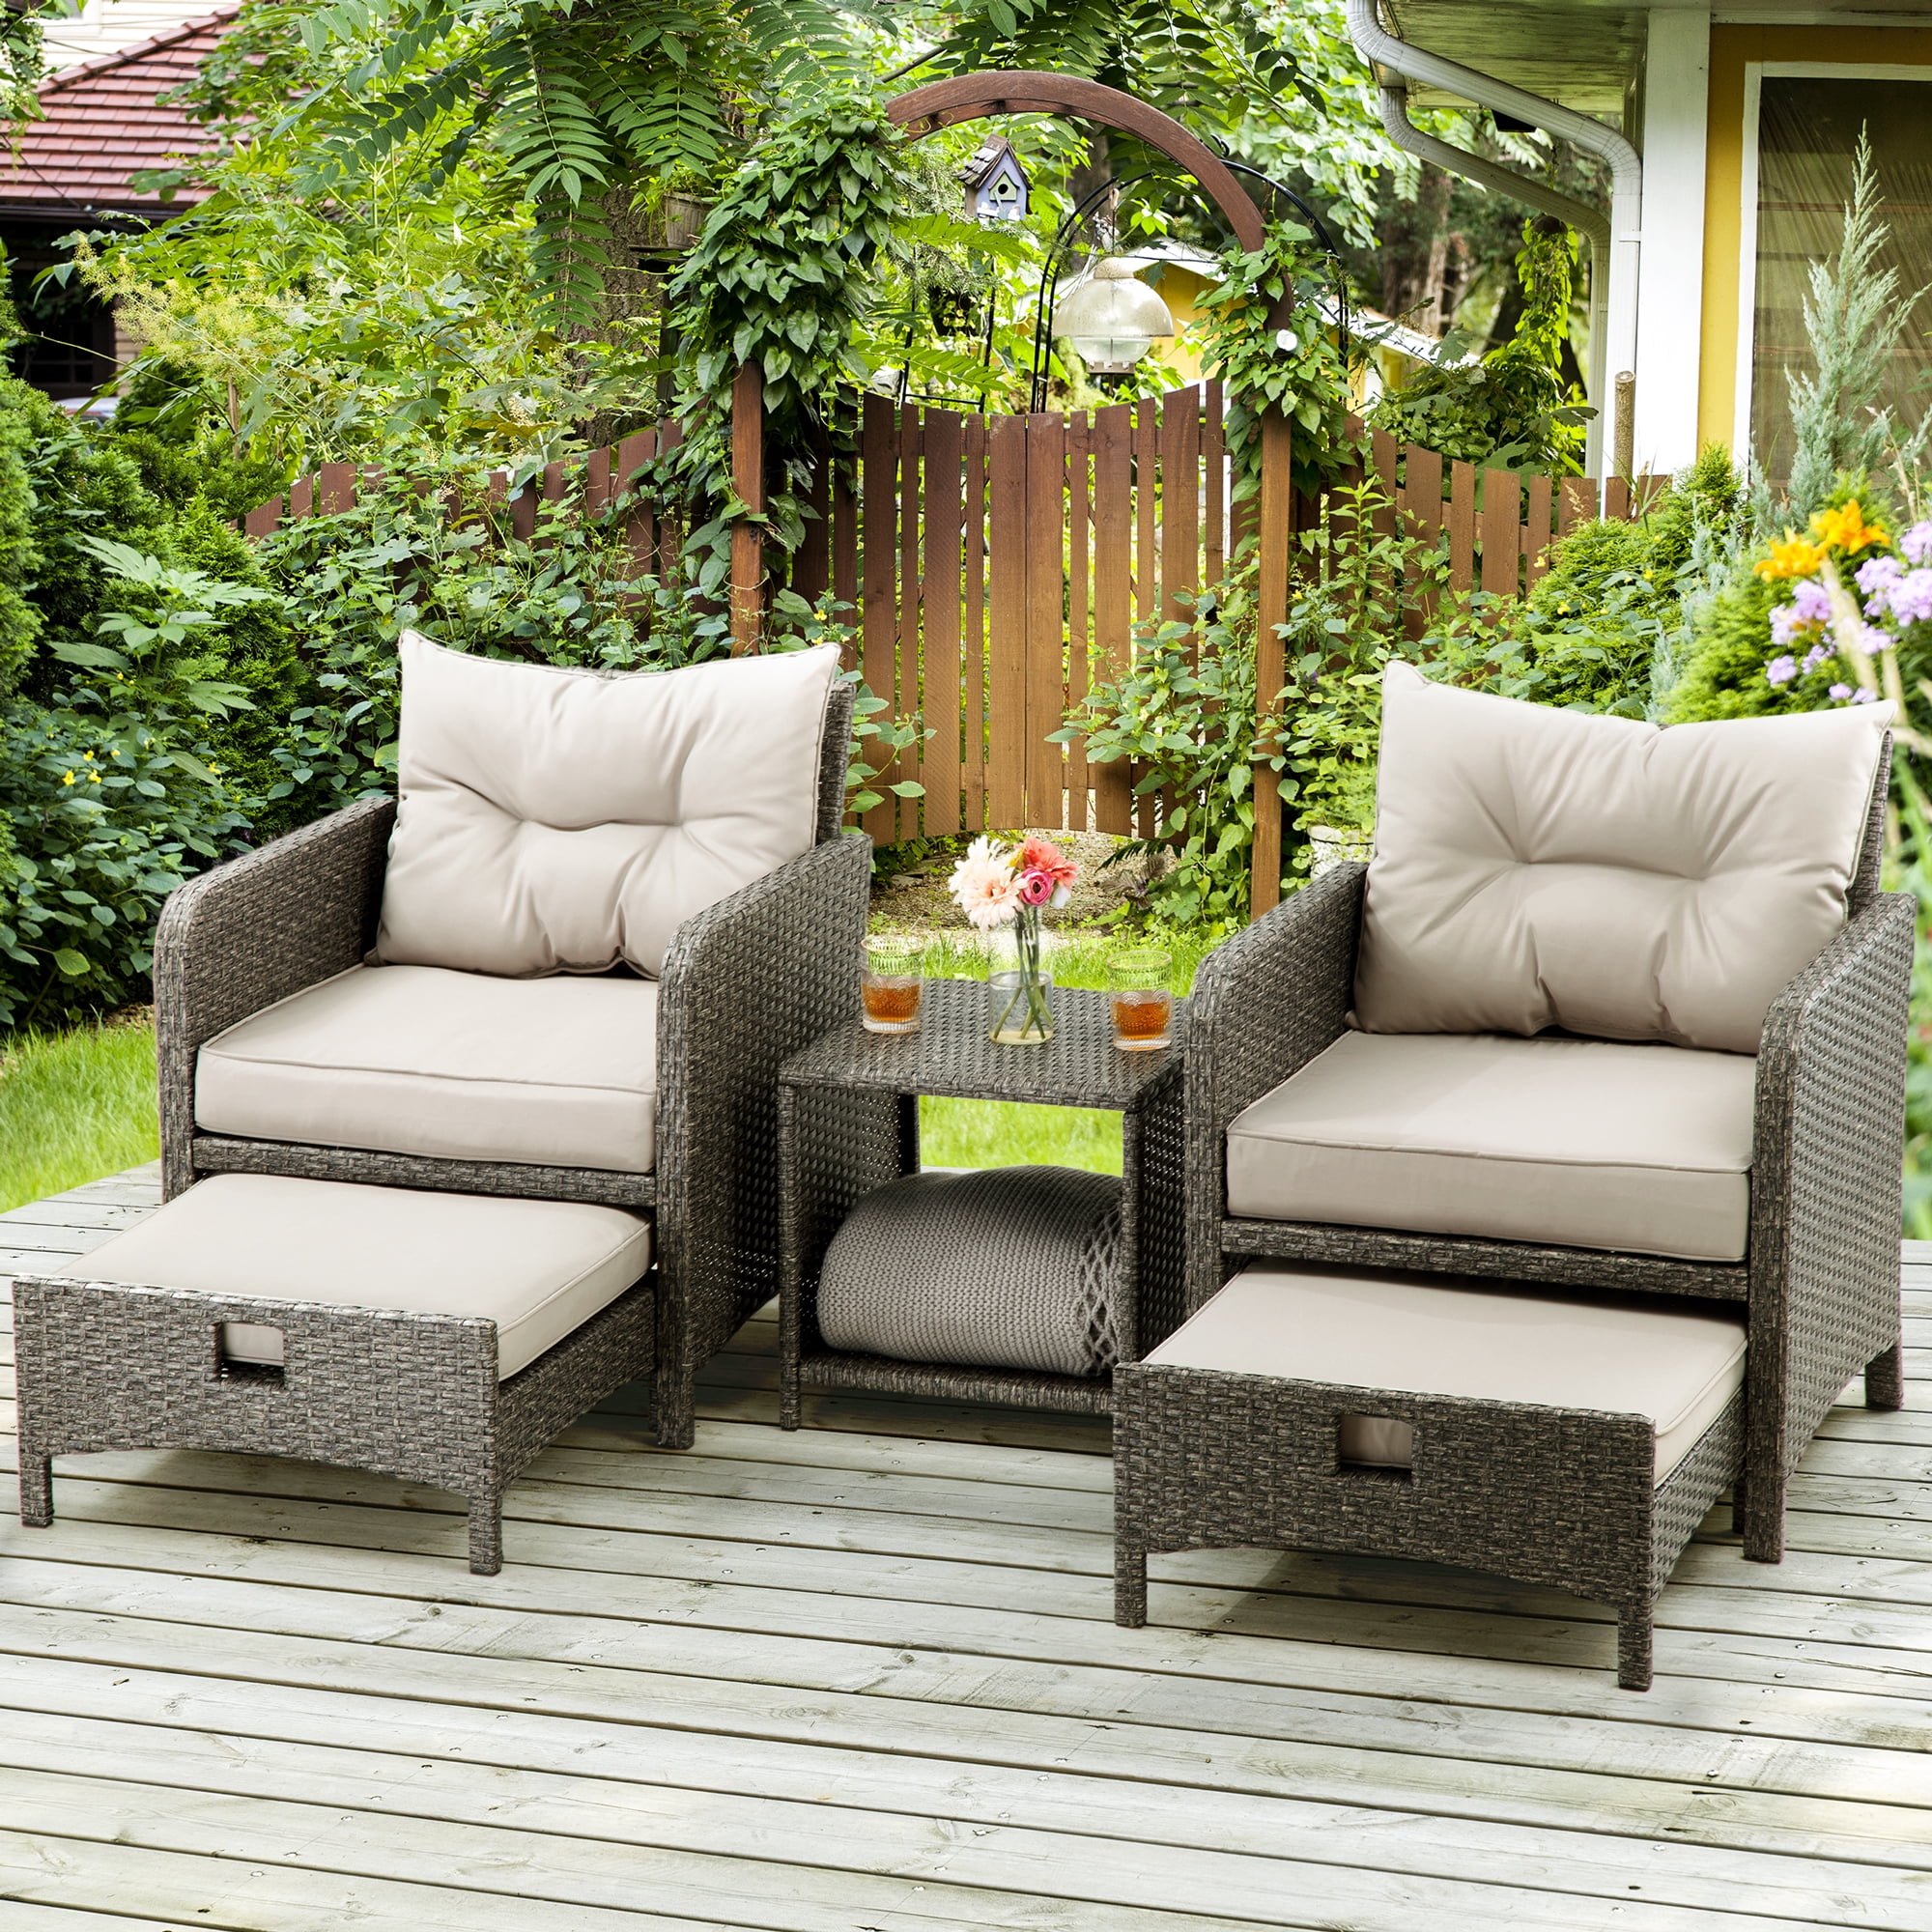 pamapic 5 pieces wicker patio furniture set outdoor patio chairs